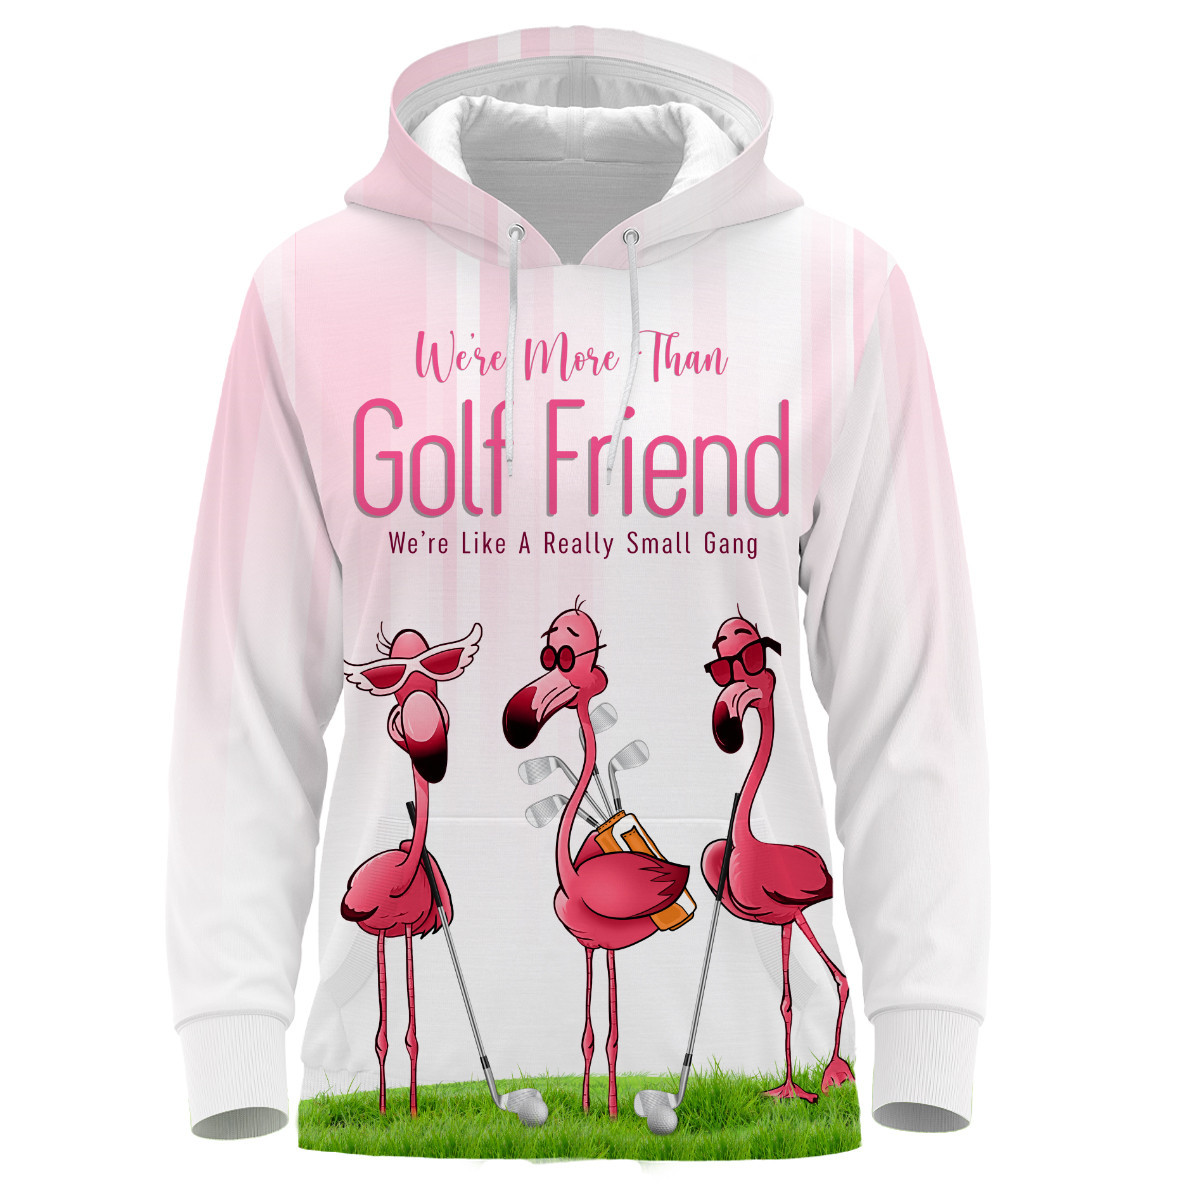 We're More Than Just Golf Friends We're Like A Small Gang Flamingo Pink Bomber Shirt Golf Hoodie Shirt For Women